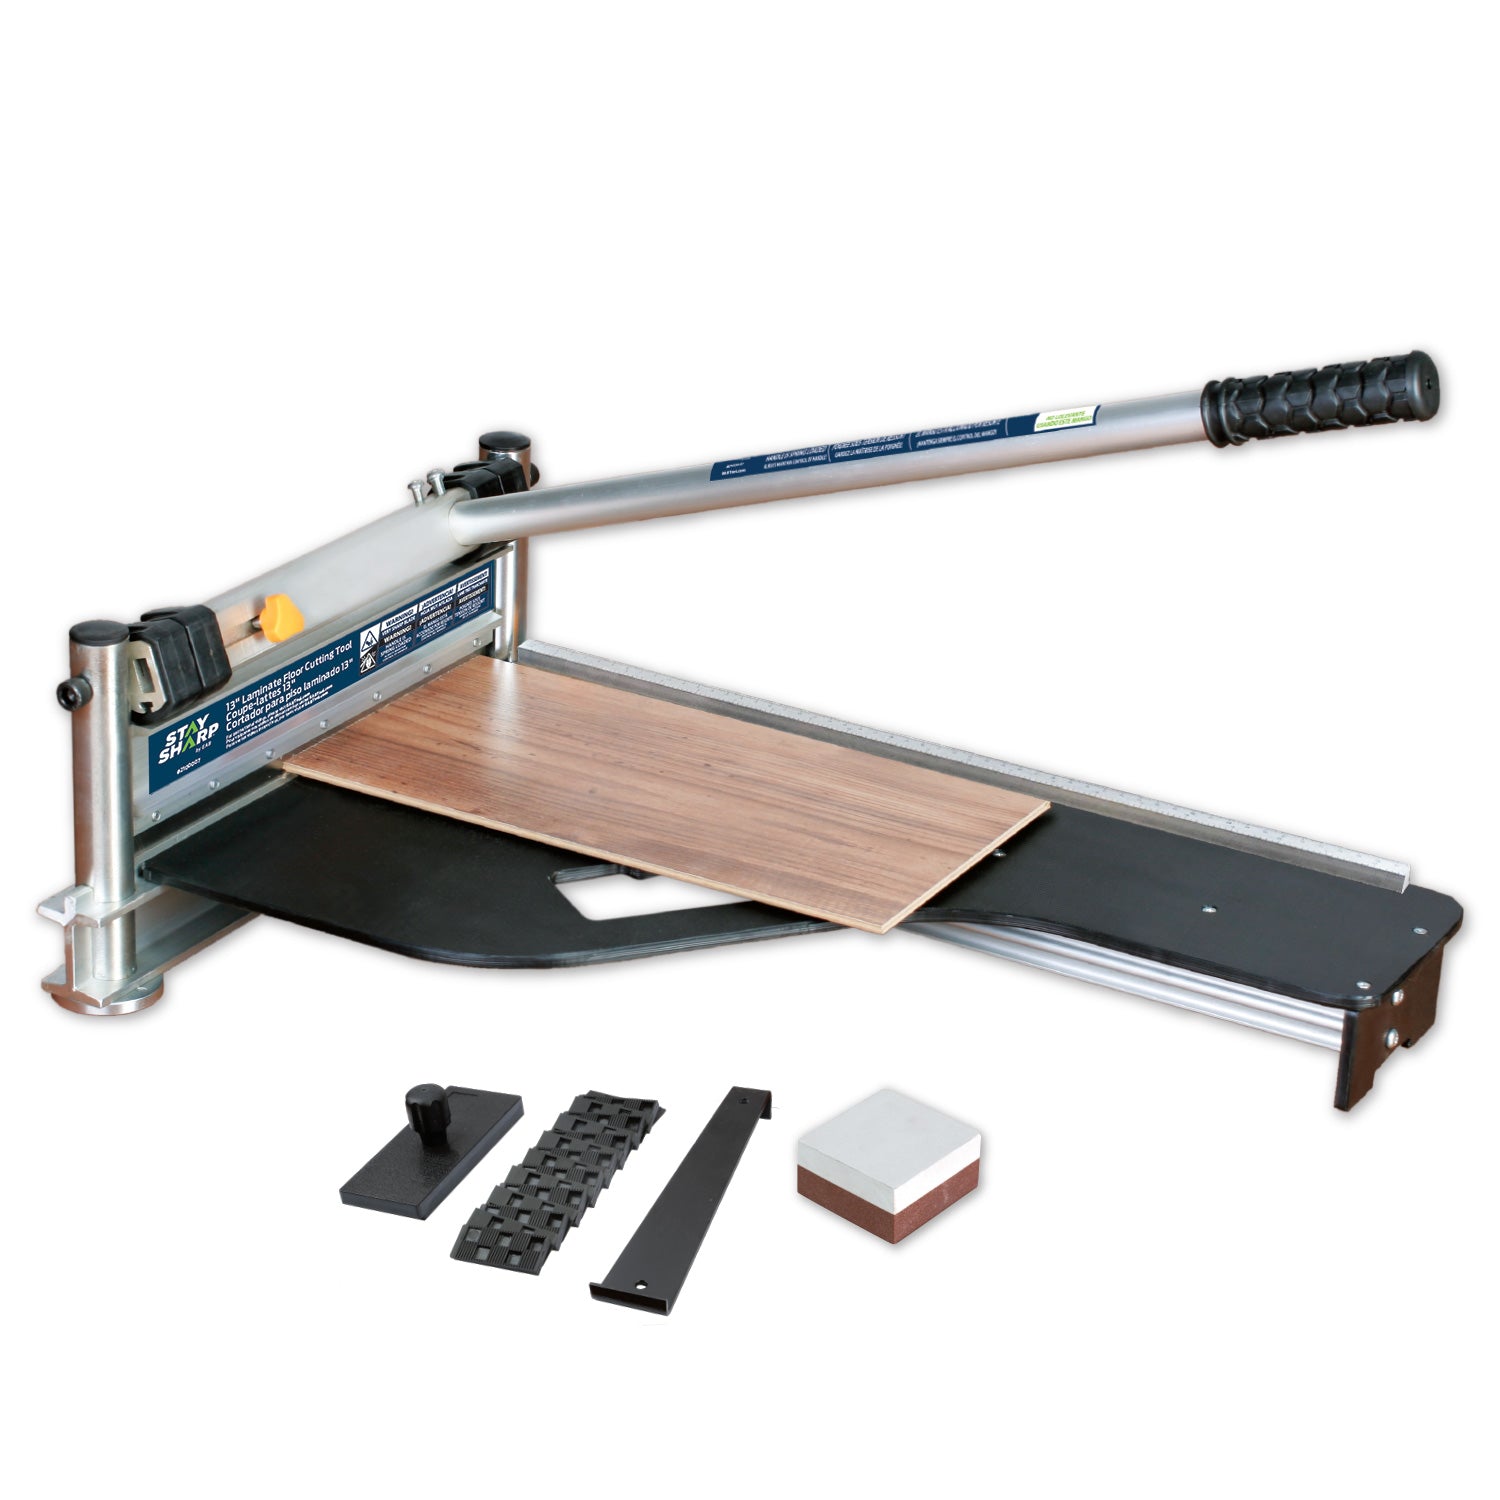 13-inch-Professional-Laminate-Floor-Cutting-Tool-(Sold-only-in-the-US)-Recyclable-Stay  Sharp